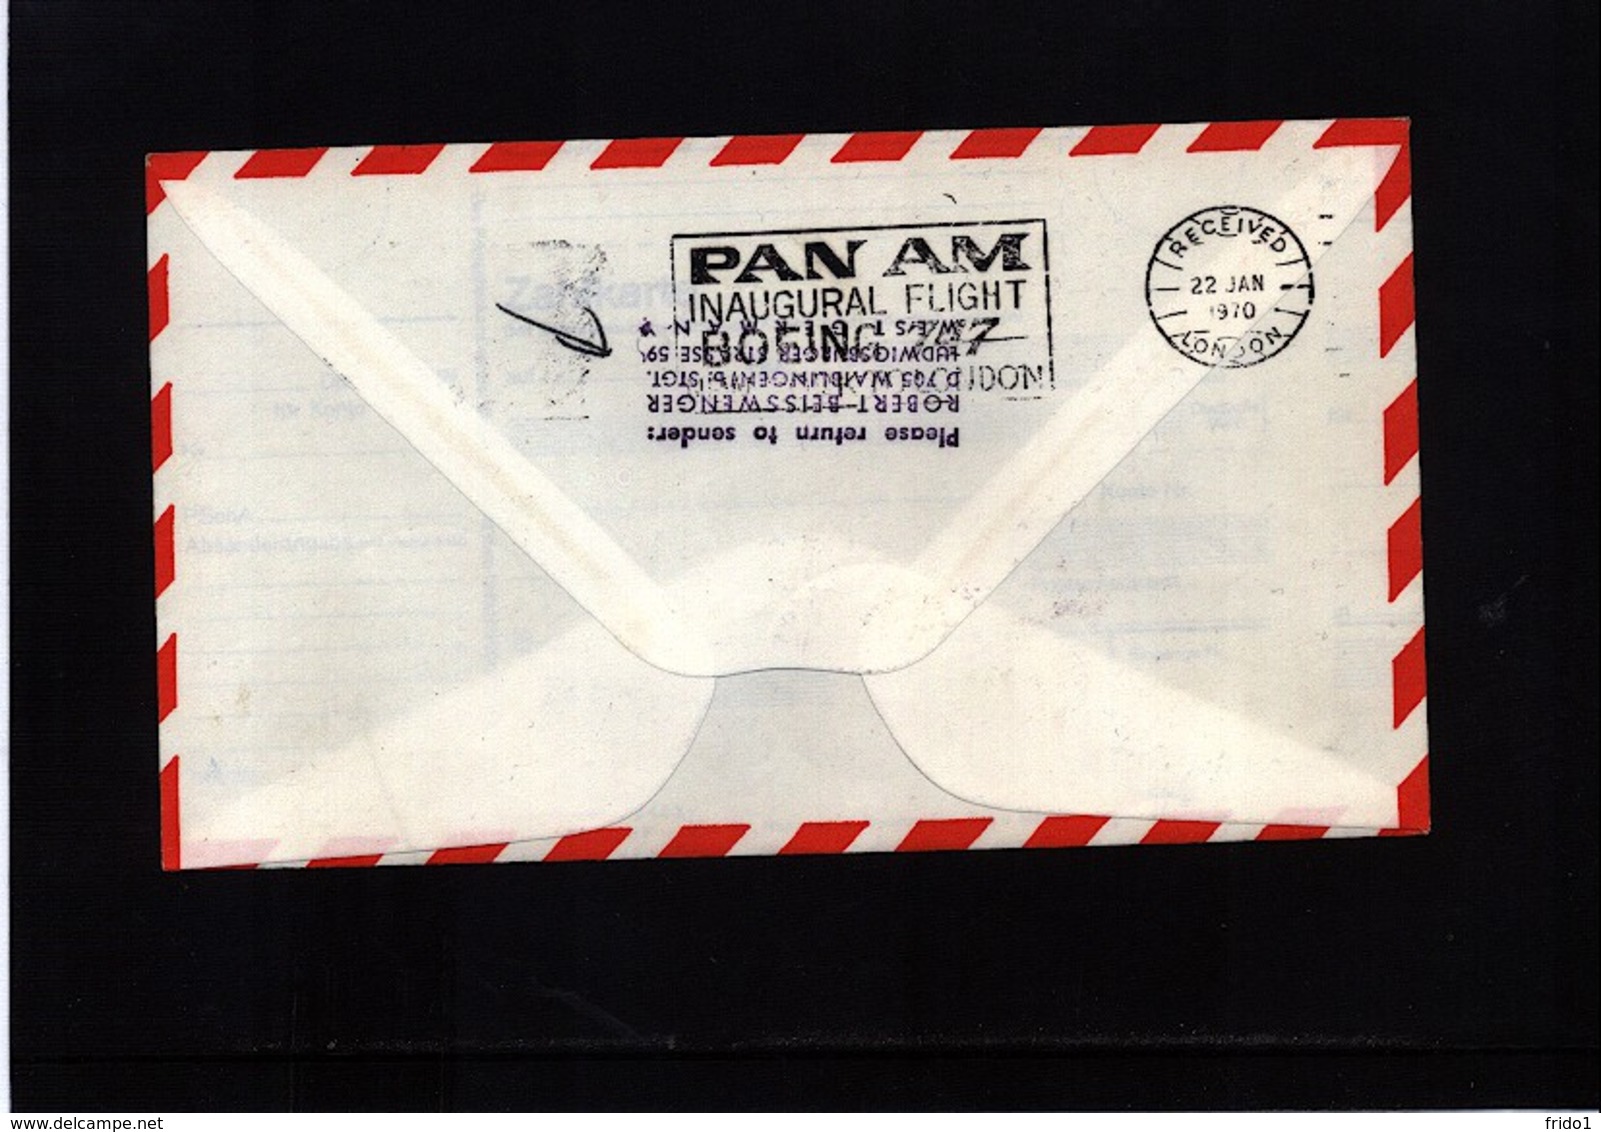 USA 1970 Pan Am First Flight 747 New York - London - Covers & Documents